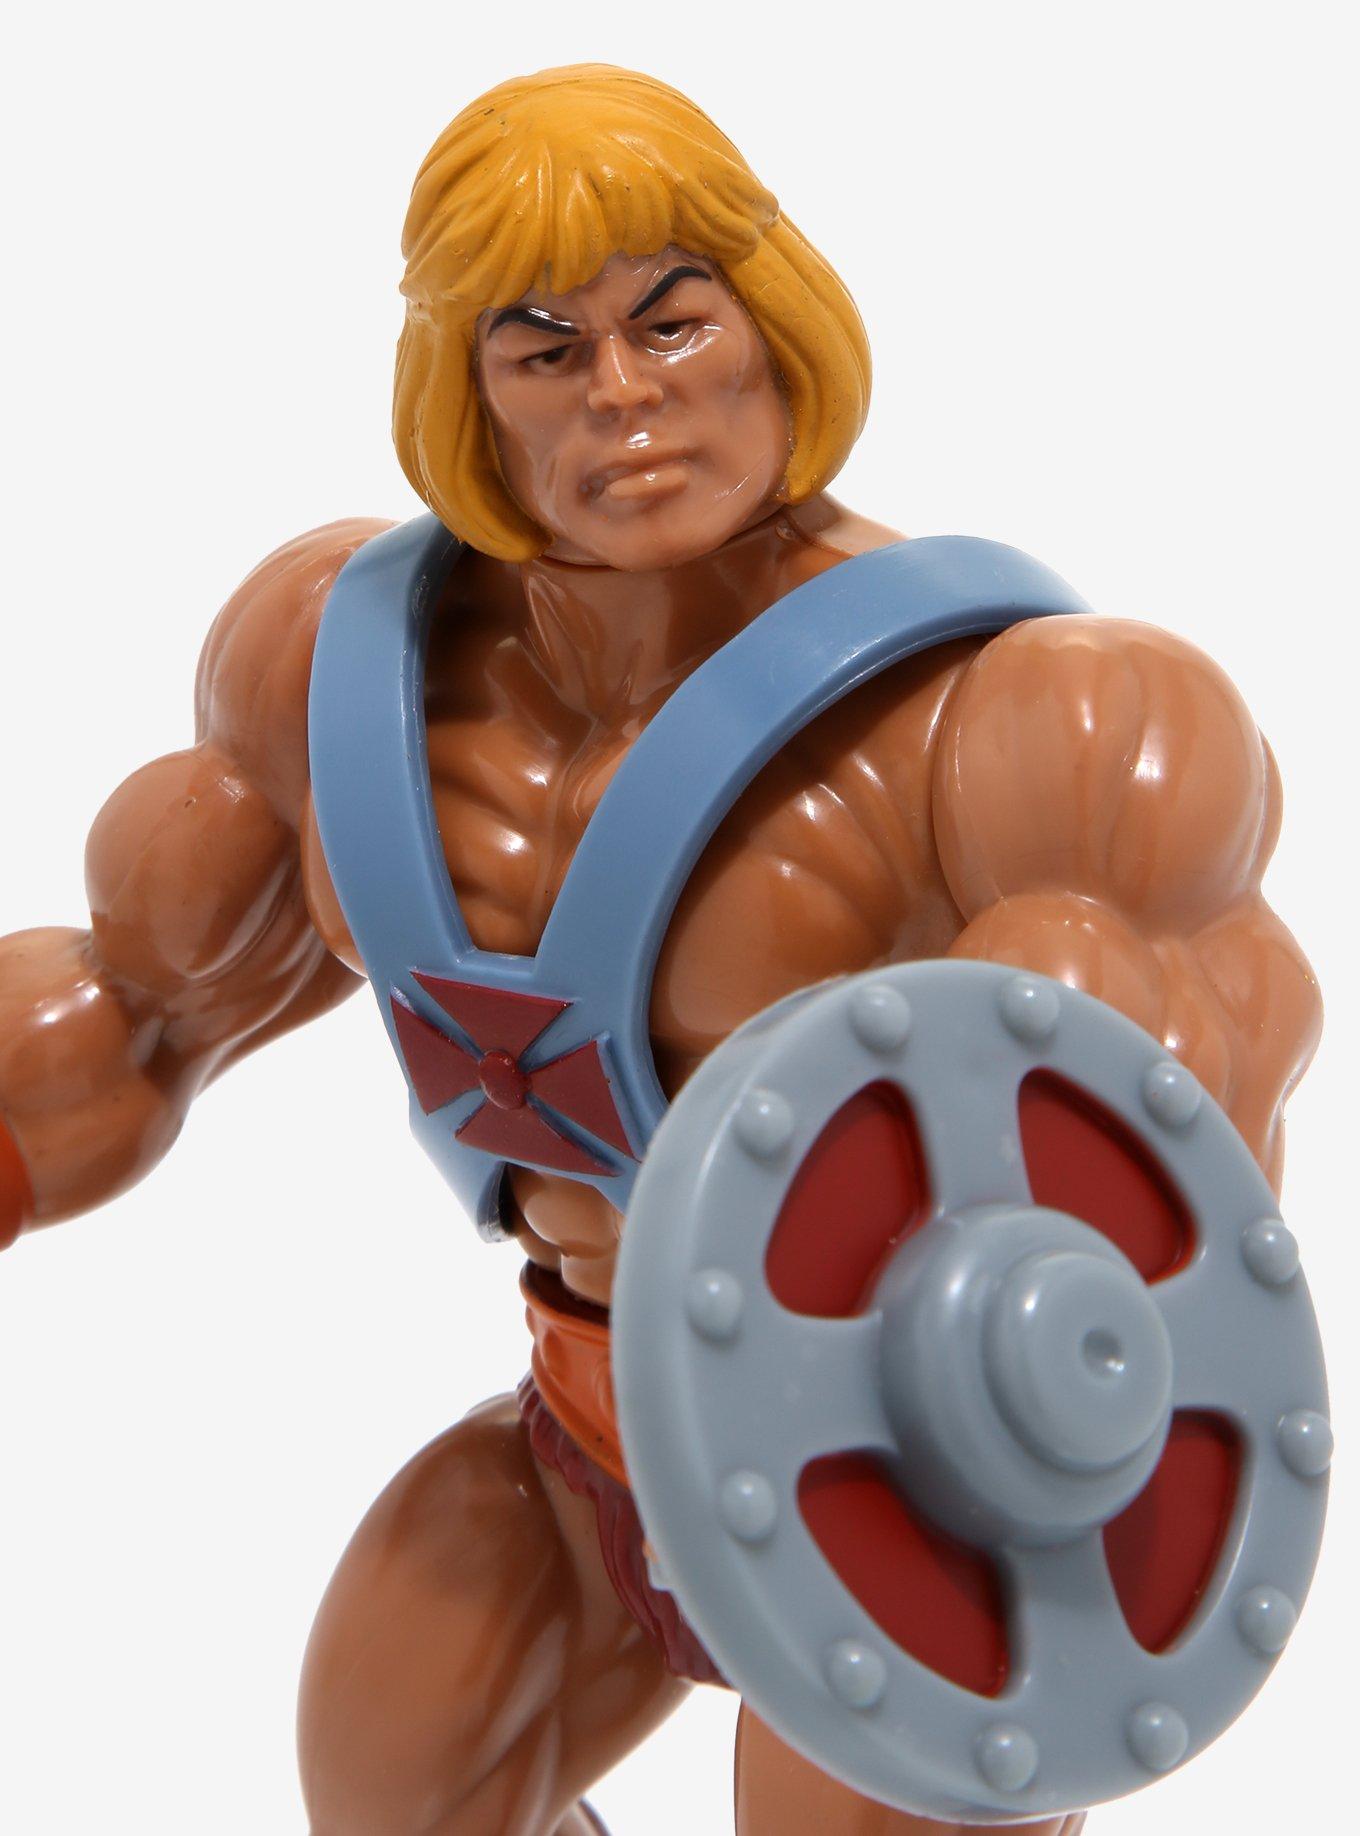 Super7 Masters Of The Universe He-Man Action Figure, , alternate